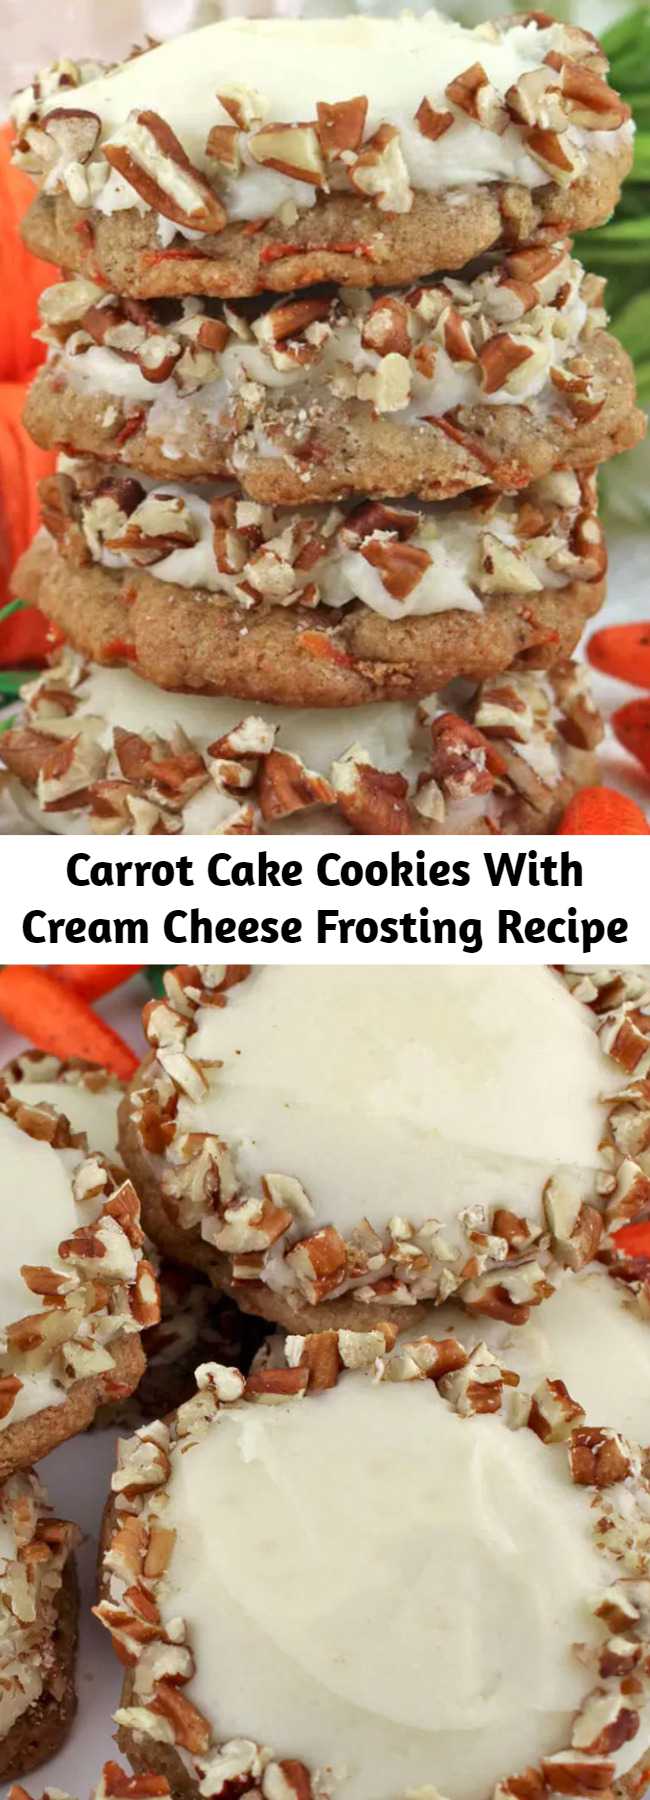 Carrot Cake Cookies With Cream Cheese Frosting Recipe - Our Carrot Cake Cookies with Cream Cheese Frosting feature a light, and fluffy cookie chocked full of carrots and cinnamon and topped with delicious cream cheese frosting.